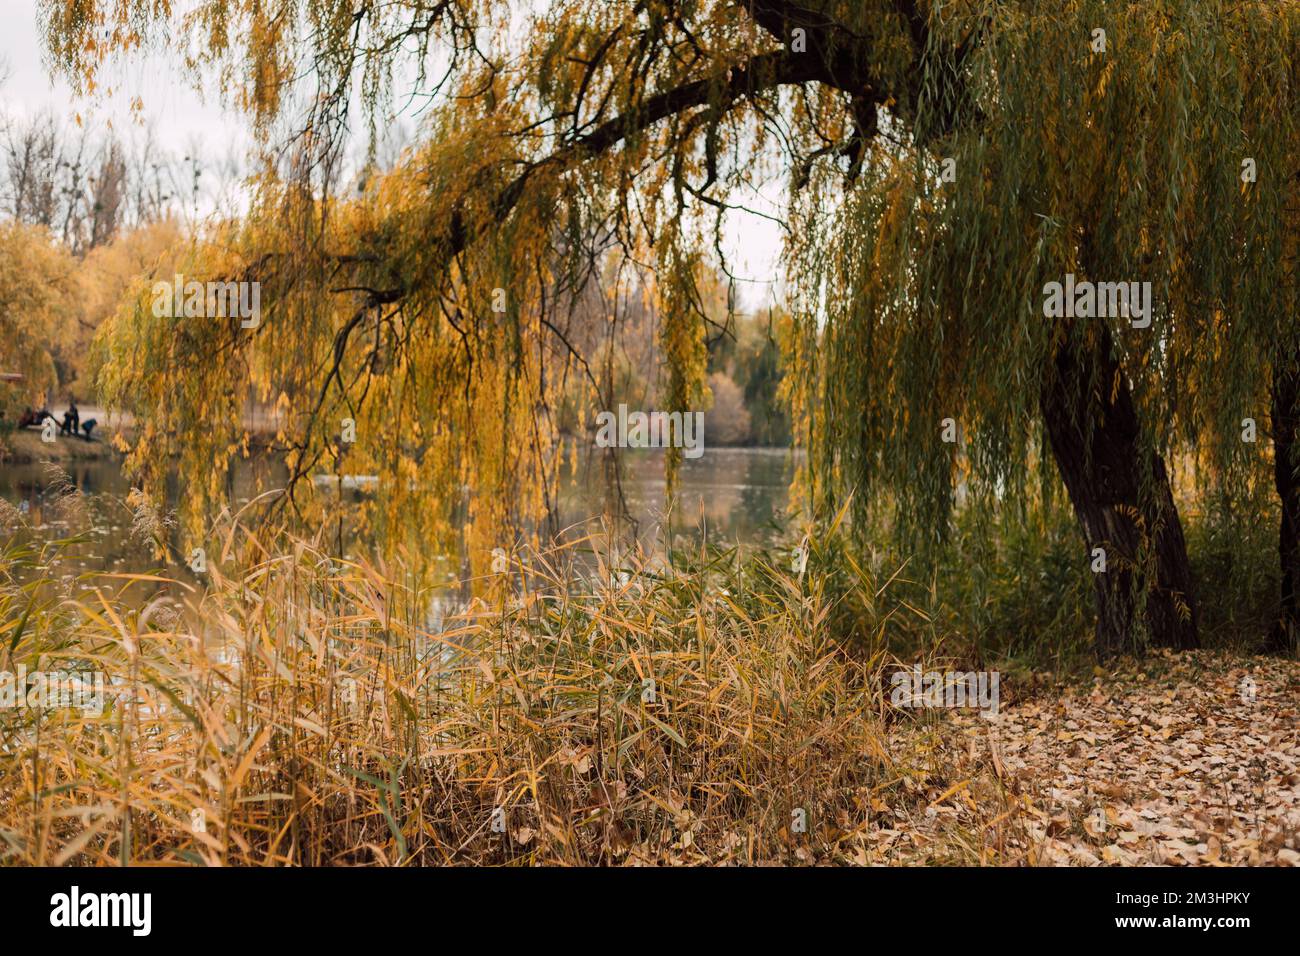 Beautiful large willow over the water in autumn. Landscape, nature Stock Photo